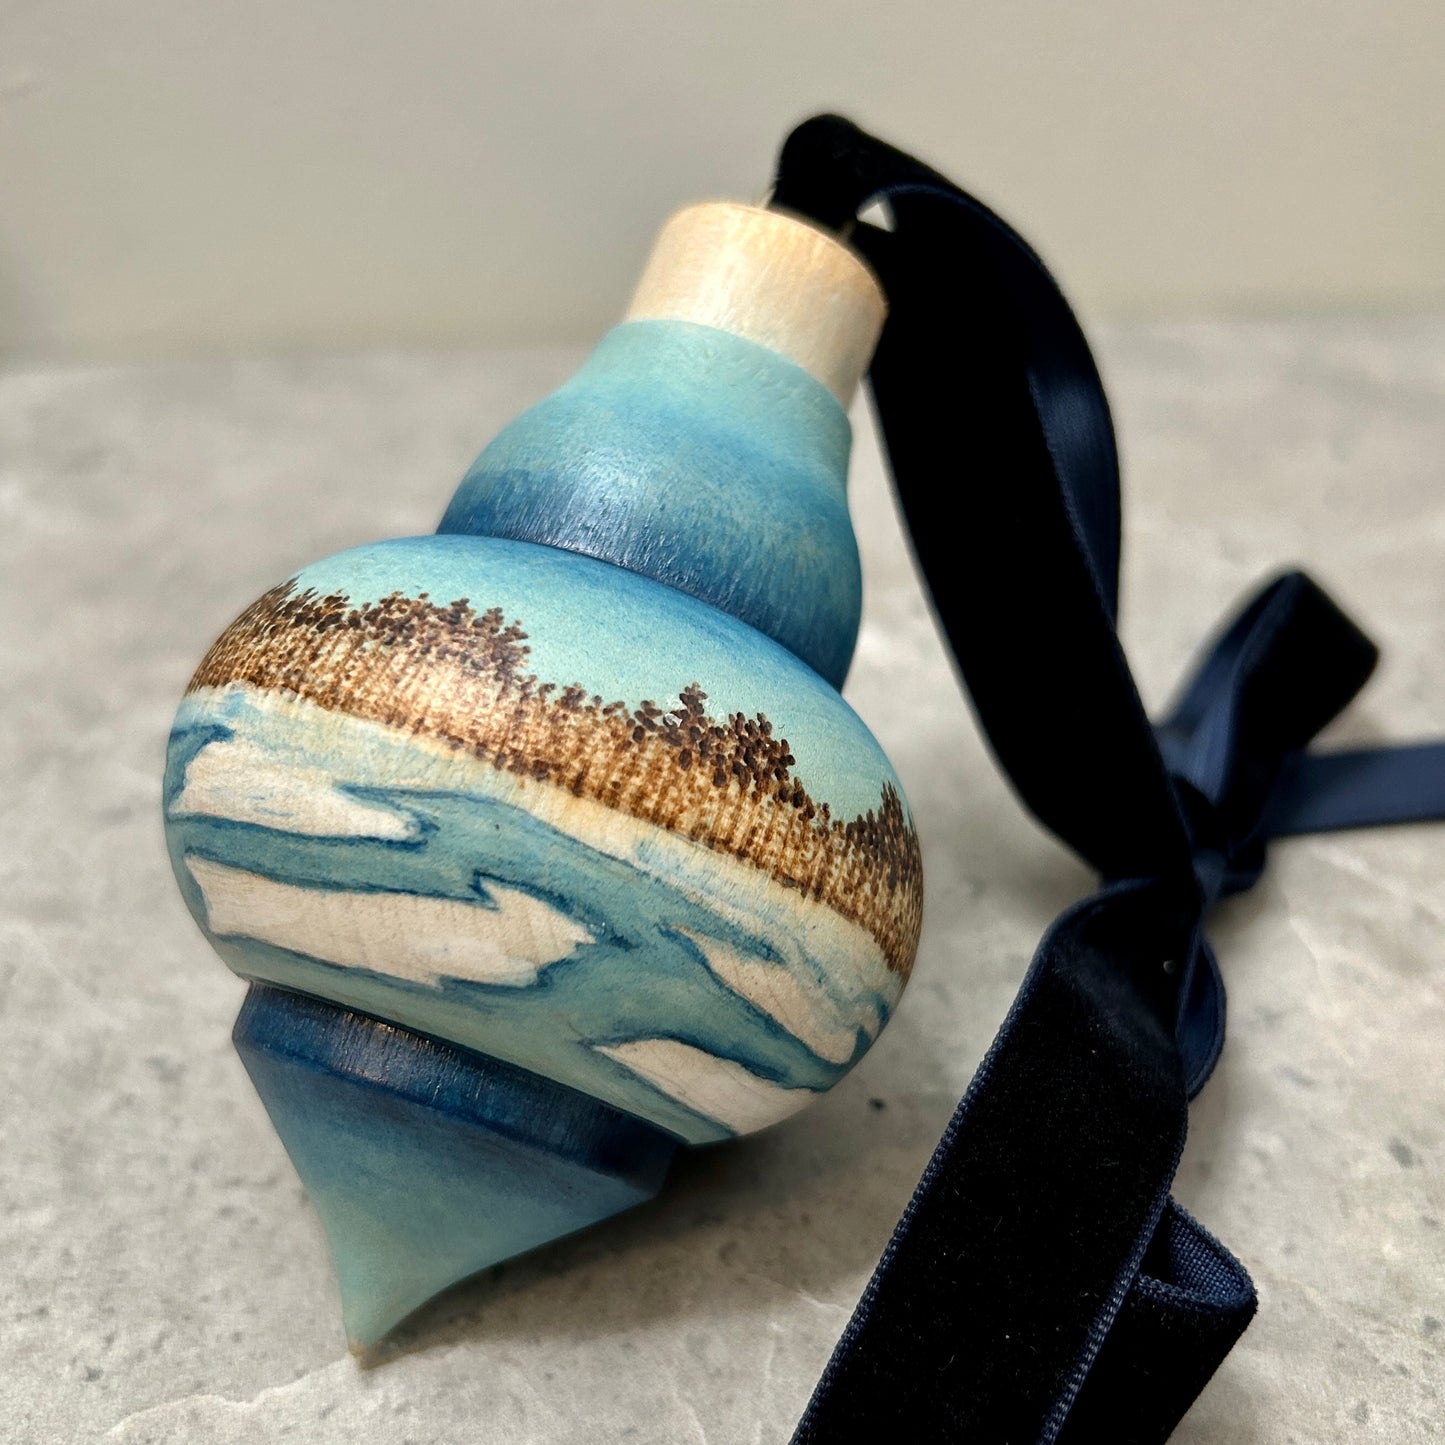 Frozen Lakeshore Wood Turned Bauble Ornament